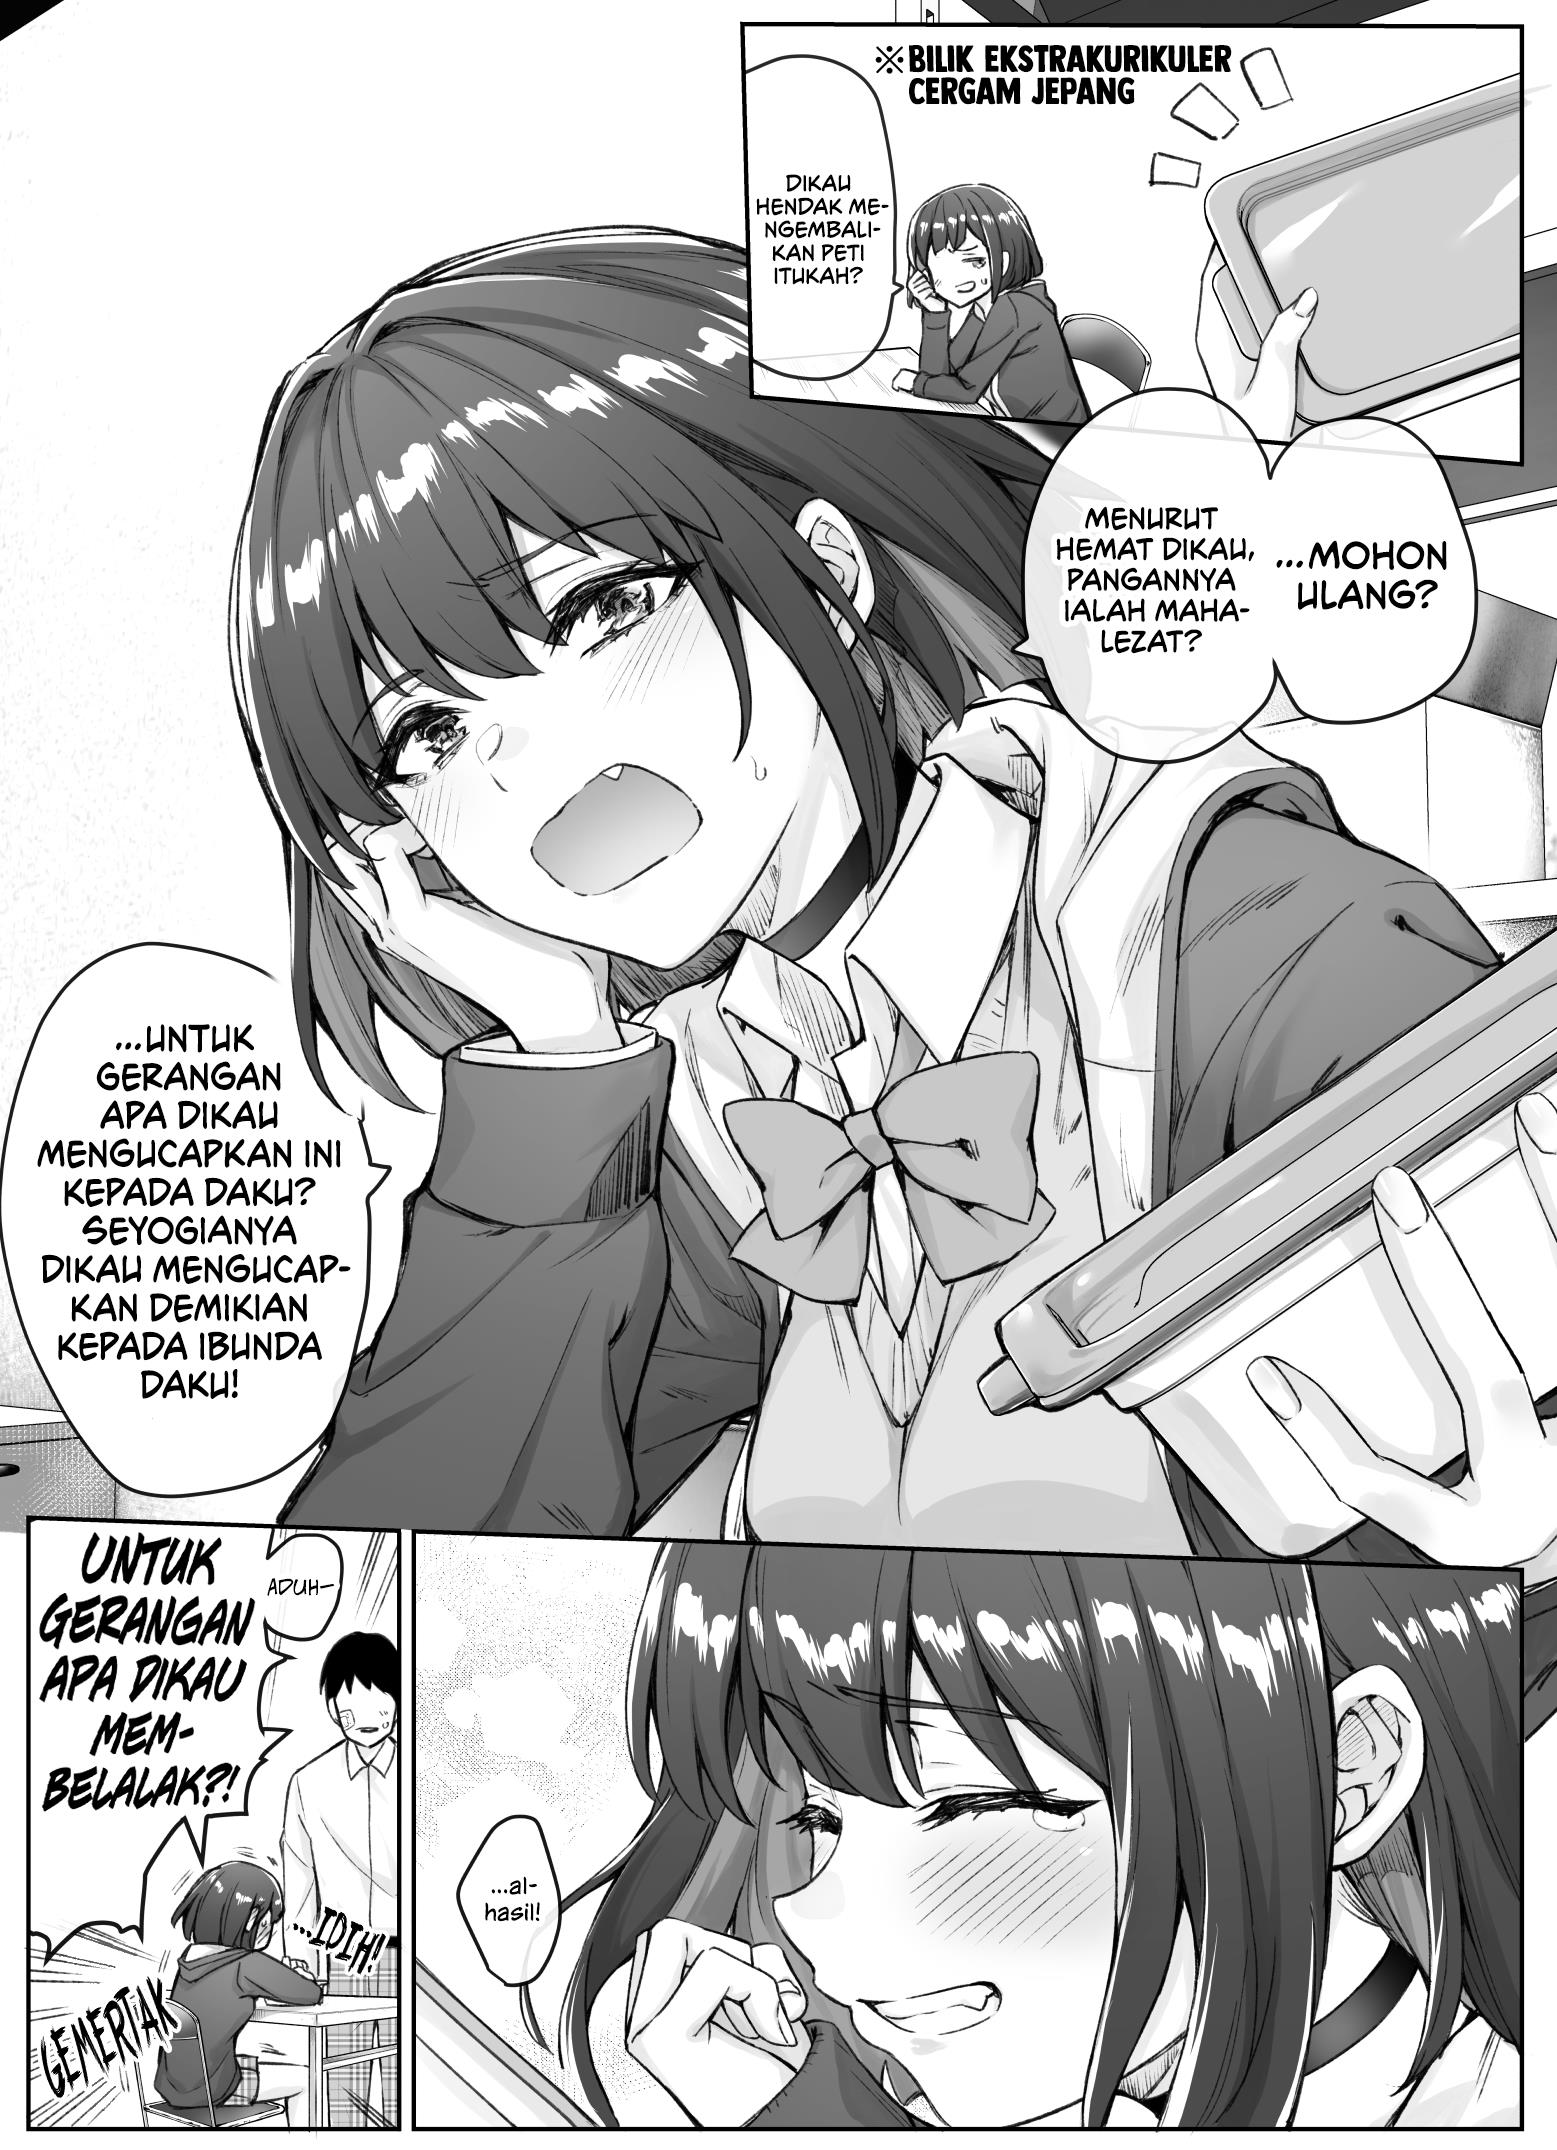 The Tsuntsuntsuntsuntsuntsun tsuntsuntsuntsuntsundere Girl Getting Less and Less Tsun Day by Day Chapter 19.1